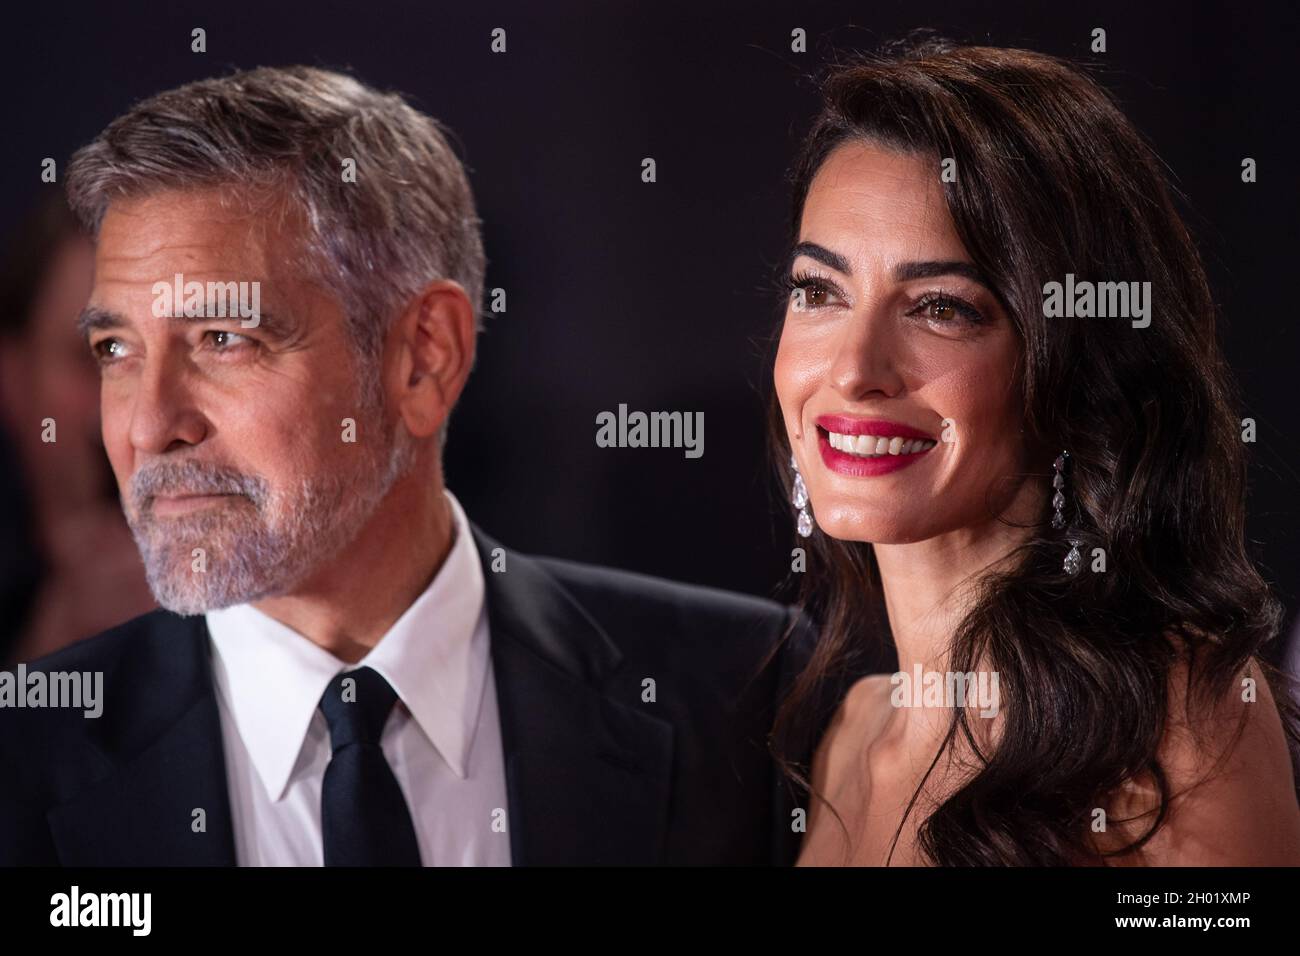 London, UK. 10 October 2021. George Clooney and wife Amal Clooney arrive for the UK premiere of 'The Tender Bar', at the Royal Festival Hall in London during the BFI London Film Festival Picture date: Sunday October 10, 2021. Photo credit should read: Matt Crossick/Empics/Alamy Live News Stock Photo